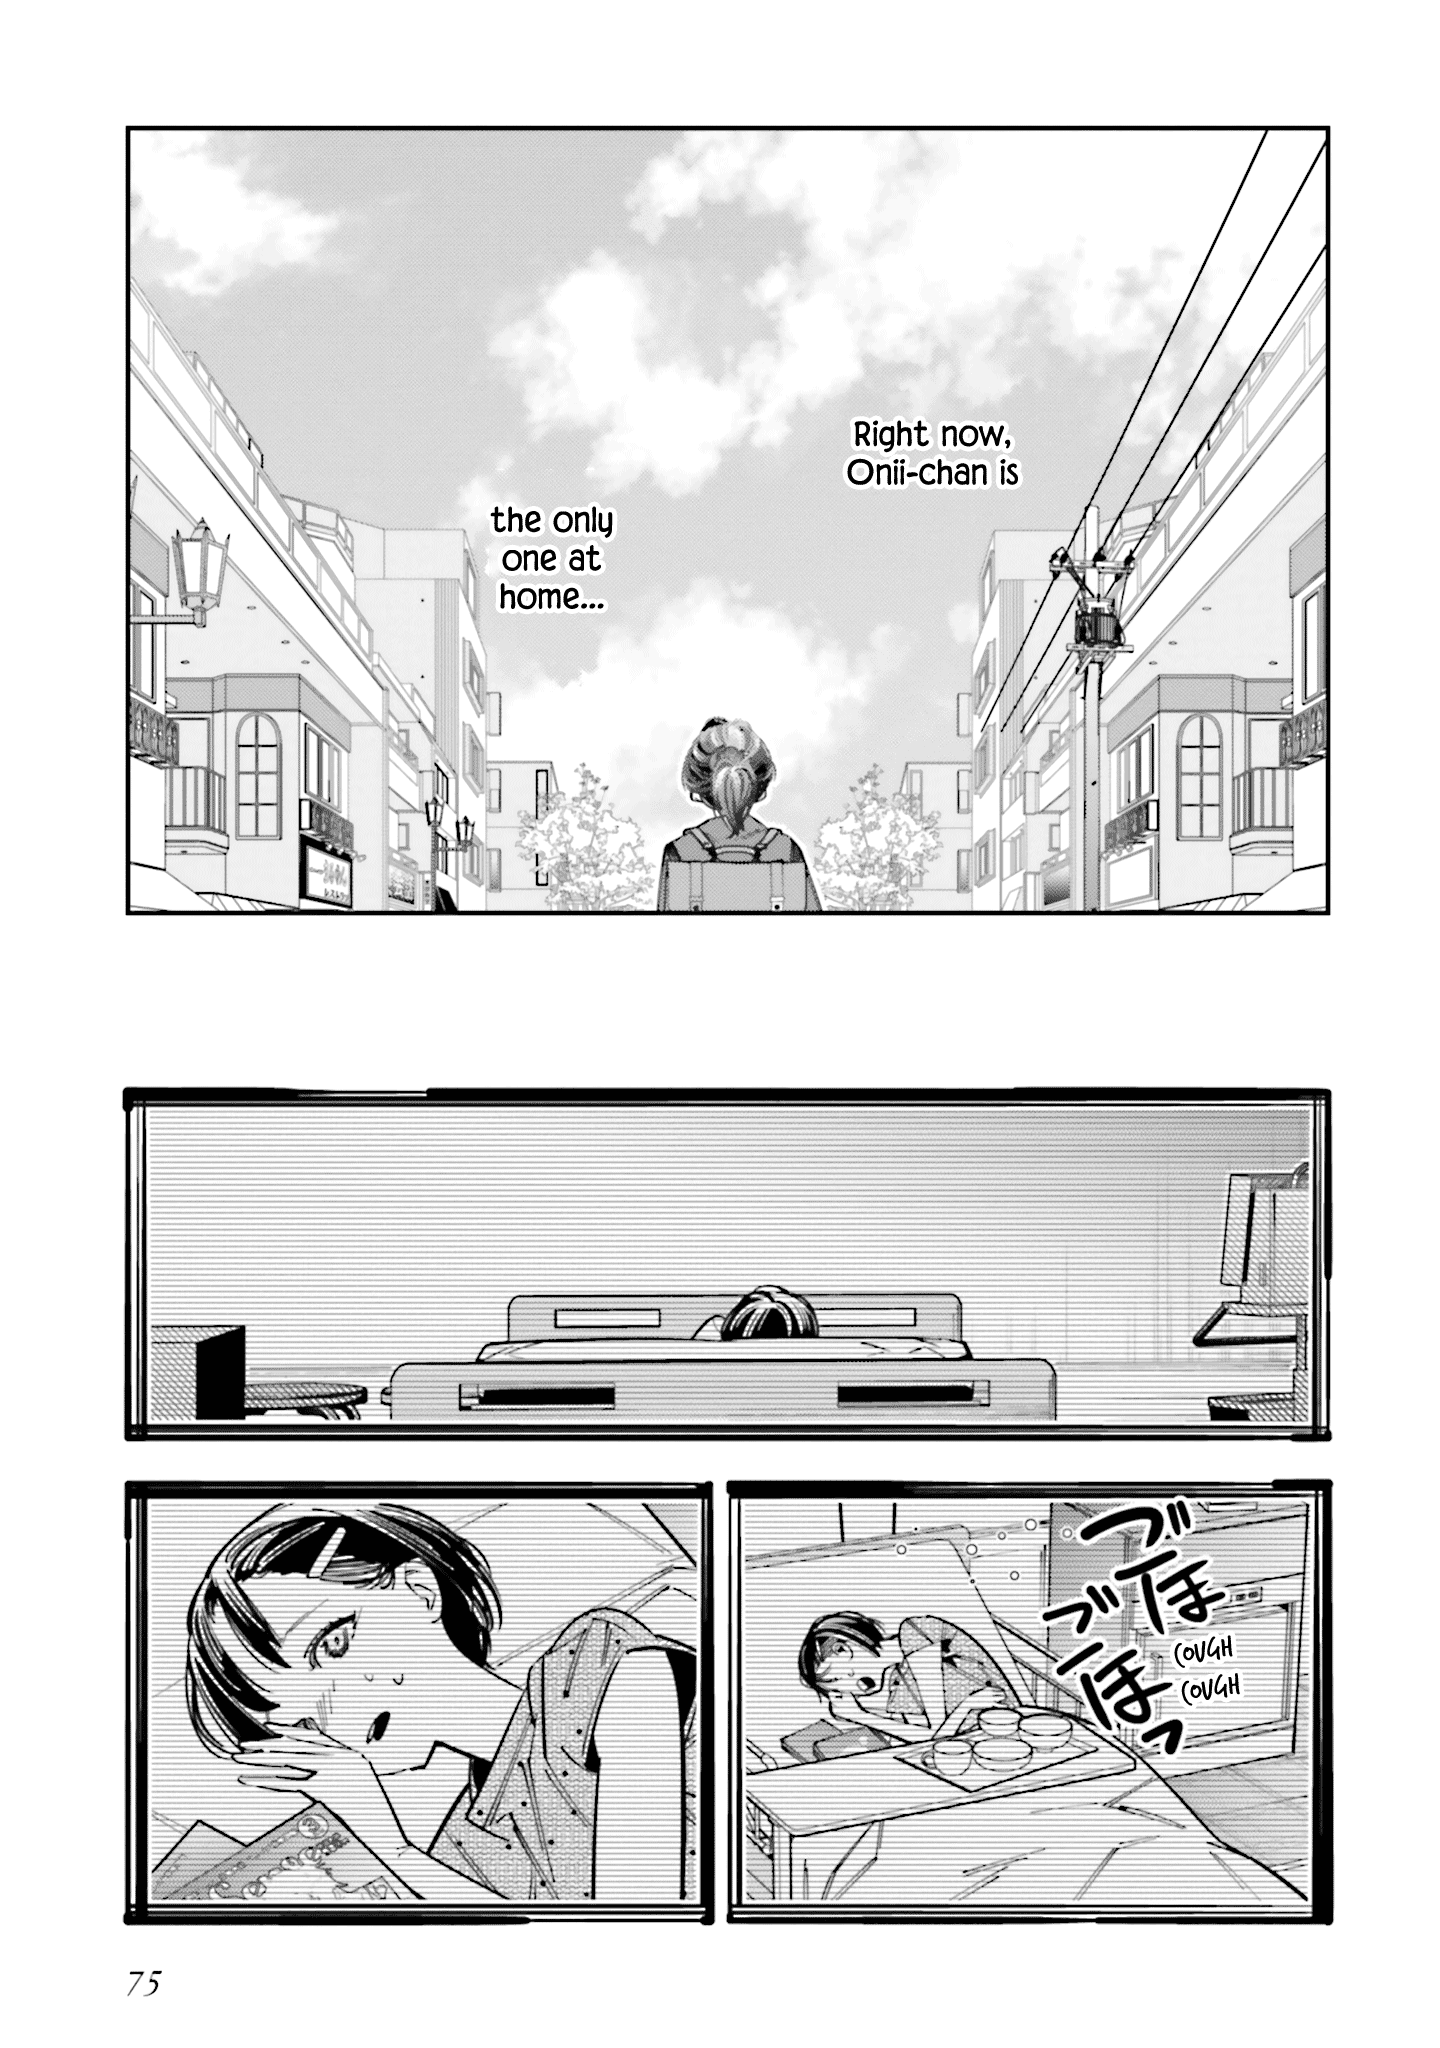 I Reincarnated As The Little Sister Of A Death Game Manga's Murder Mastermind And Failed Chapter 12 #7